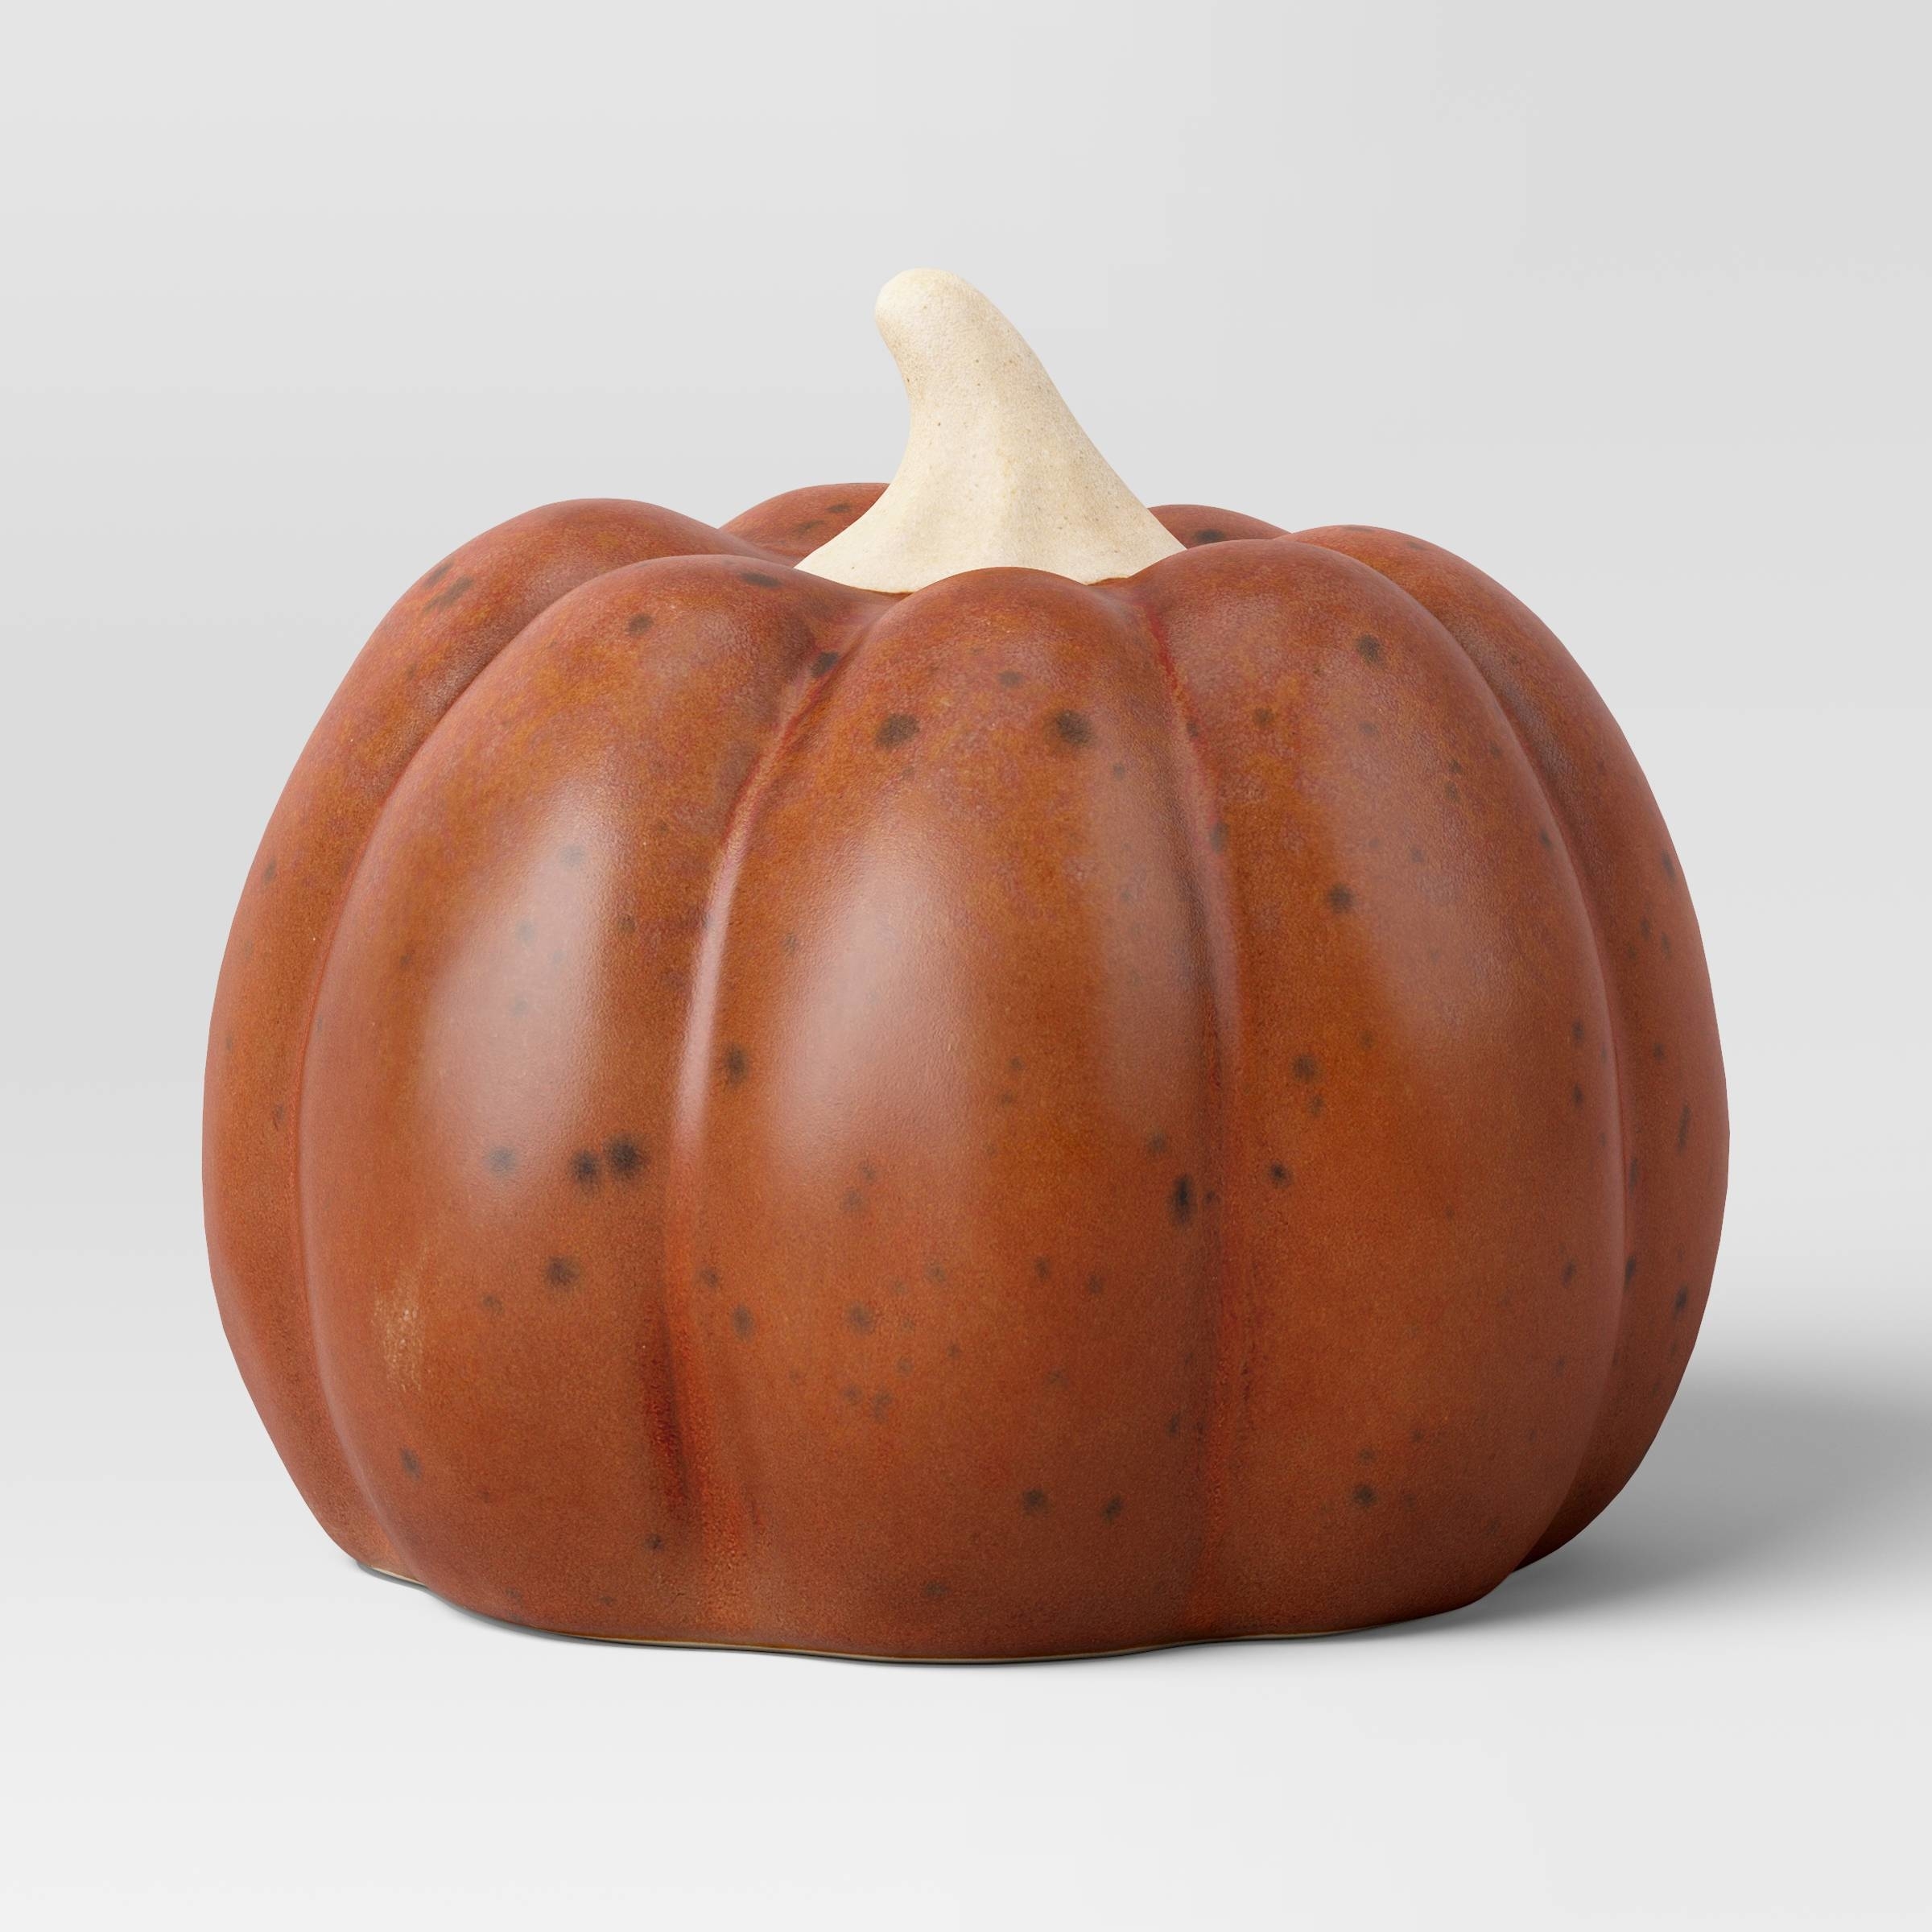 the ceramic pumpkin with a rust-color